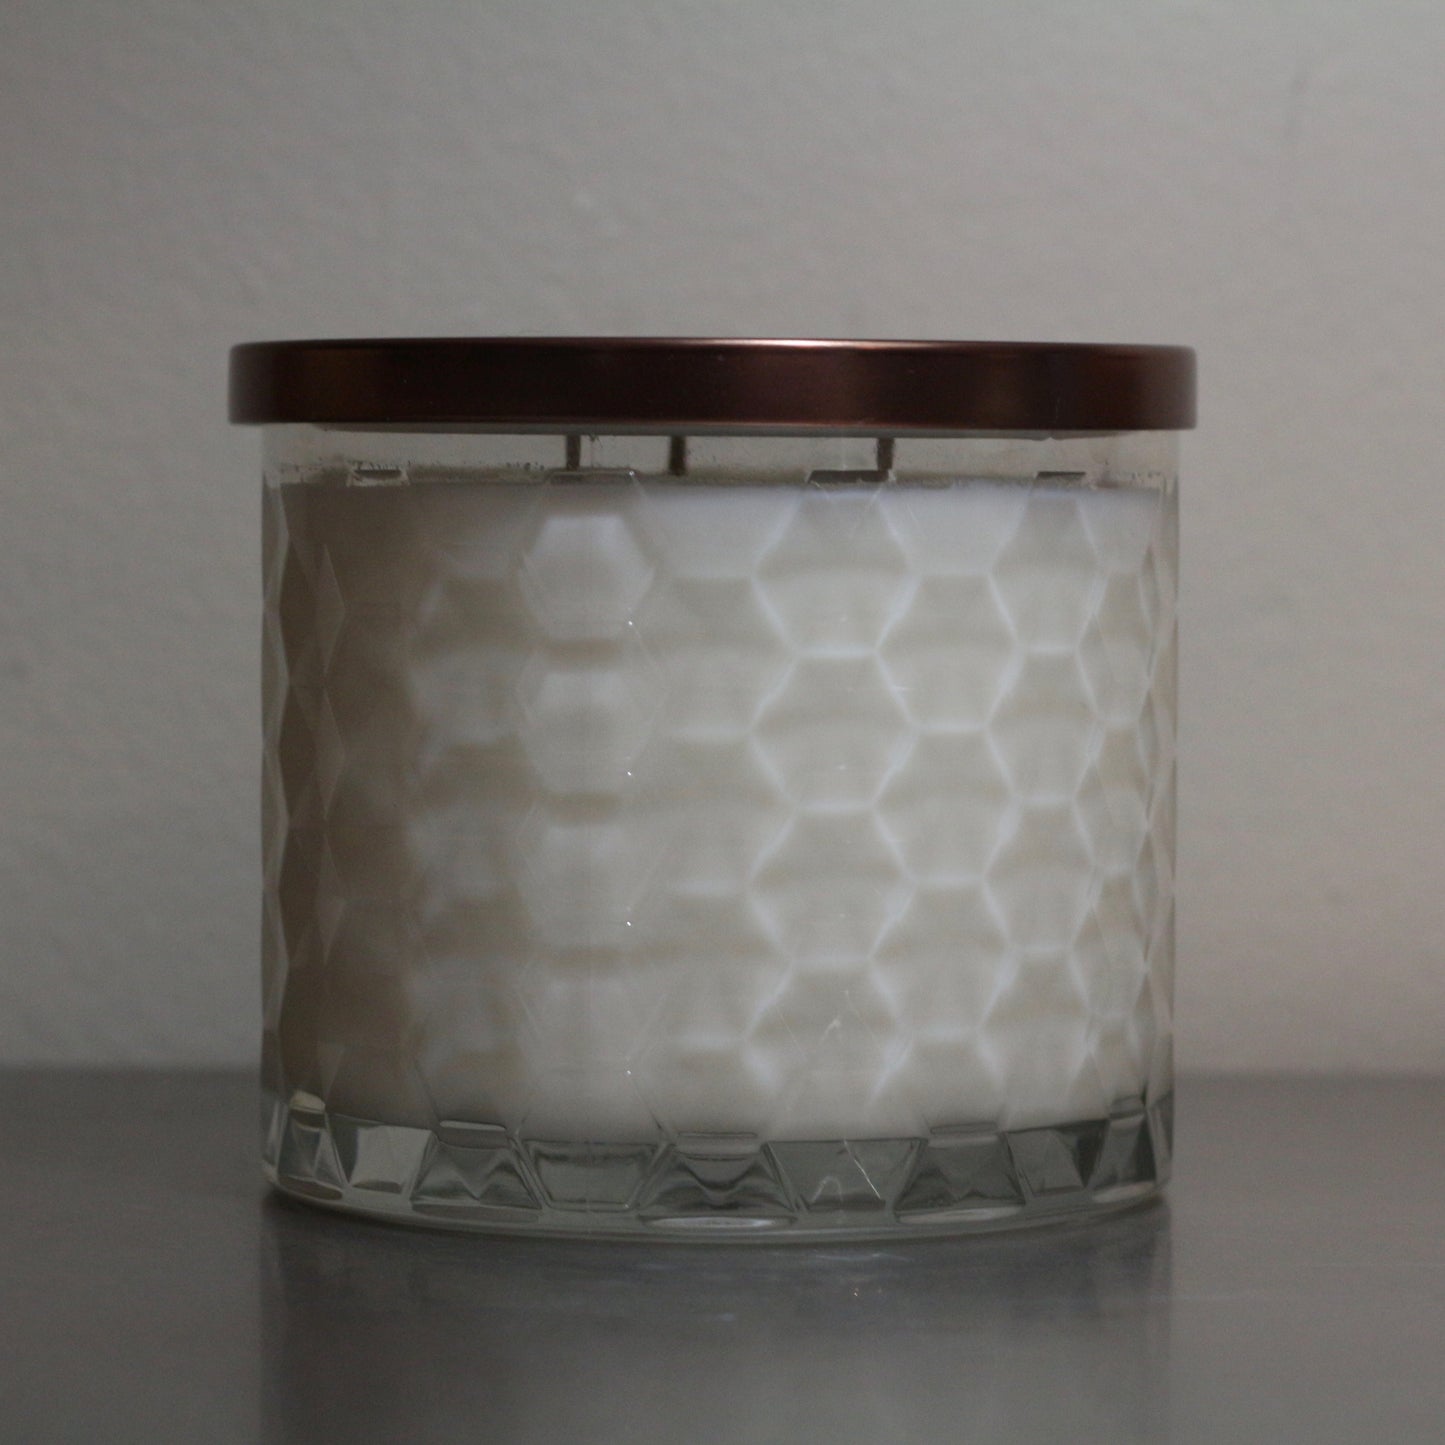 White Tea | Handpoured 3-Wick Soy Wax Candle